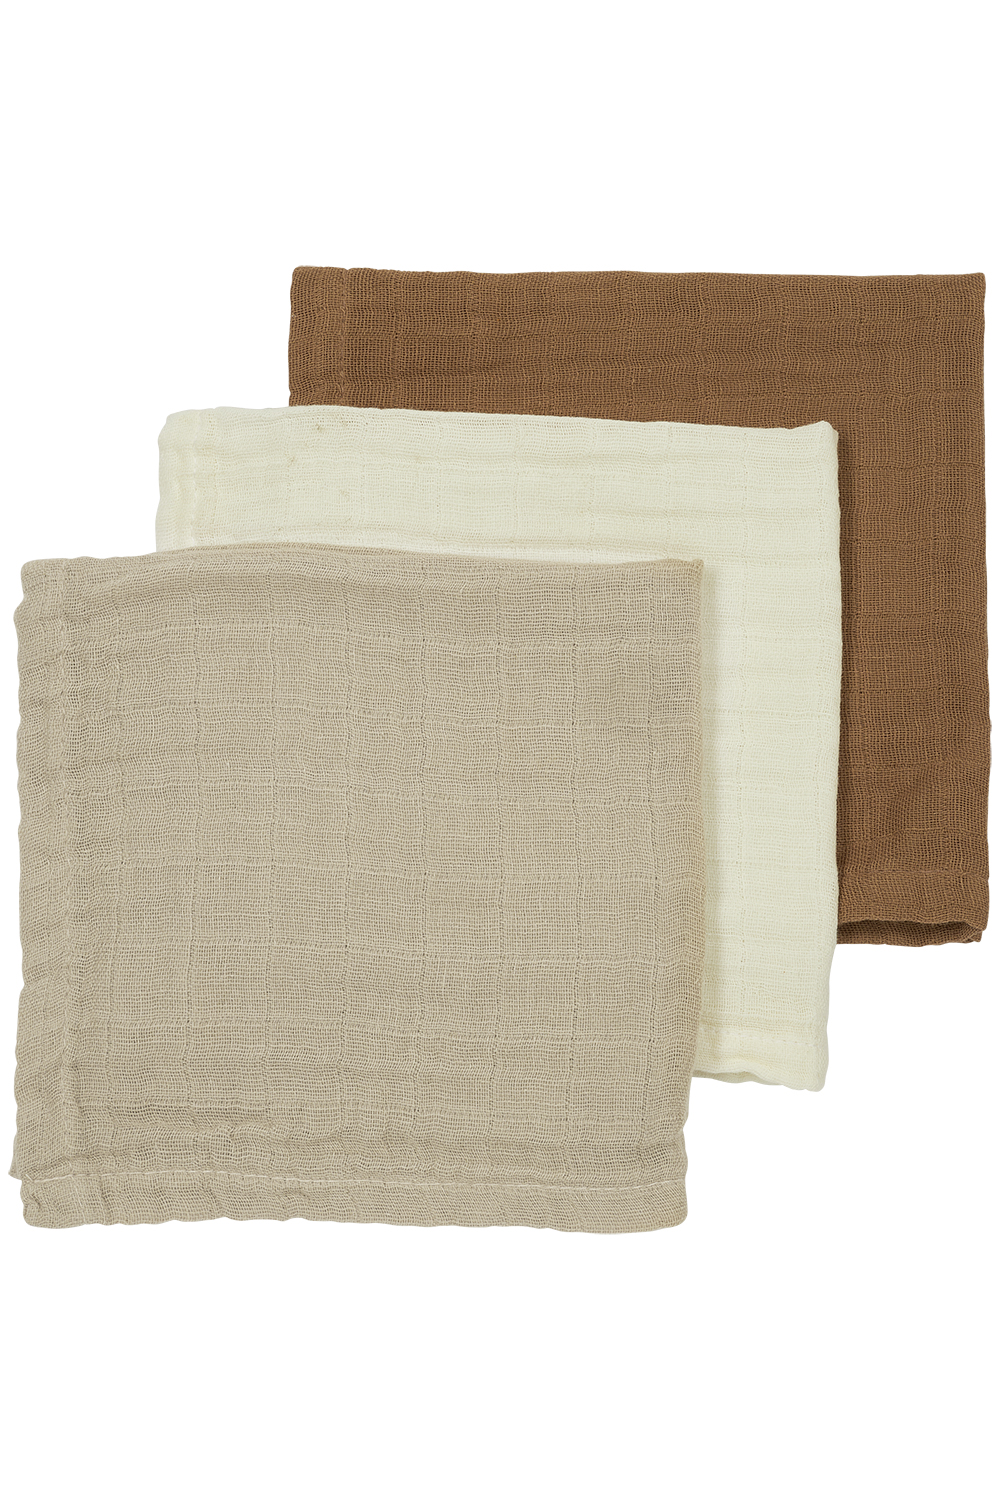 Facecloth 3-pack muslin Uni - offwhite/sand/toffee - 30x30cm